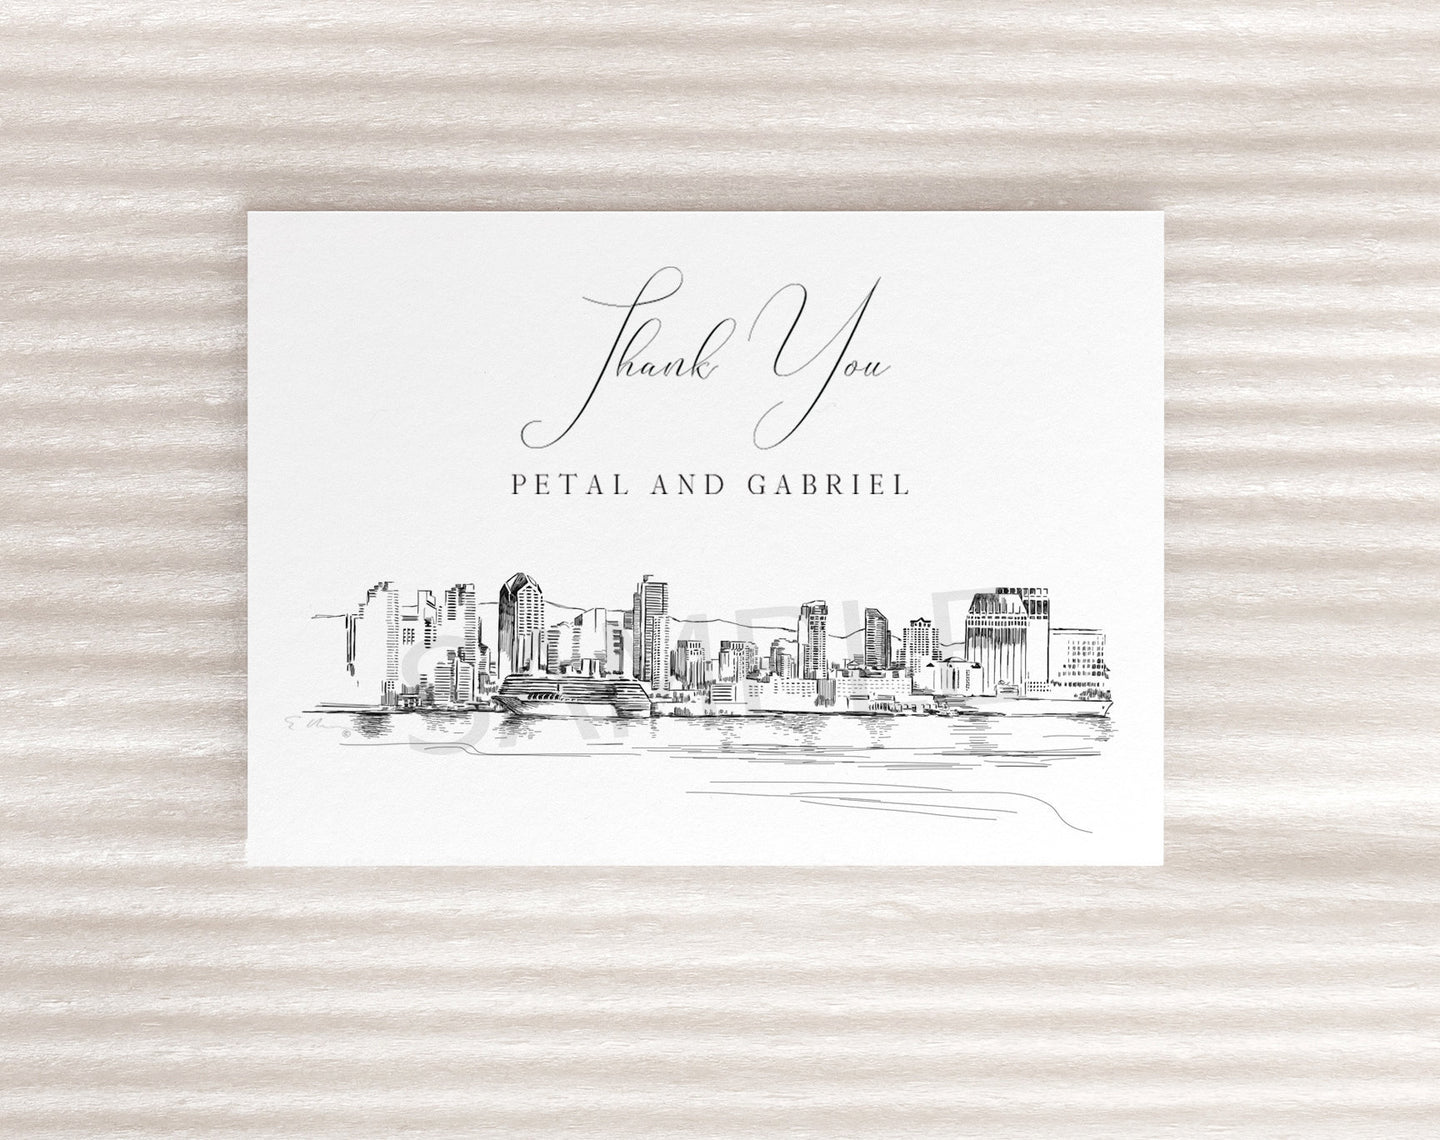 San Diego Skyline Thank You Cards, Personal Note Cards, Bridal Shower, Real Estate Agent, Corporate Thank you Cards (set of 25 cards)